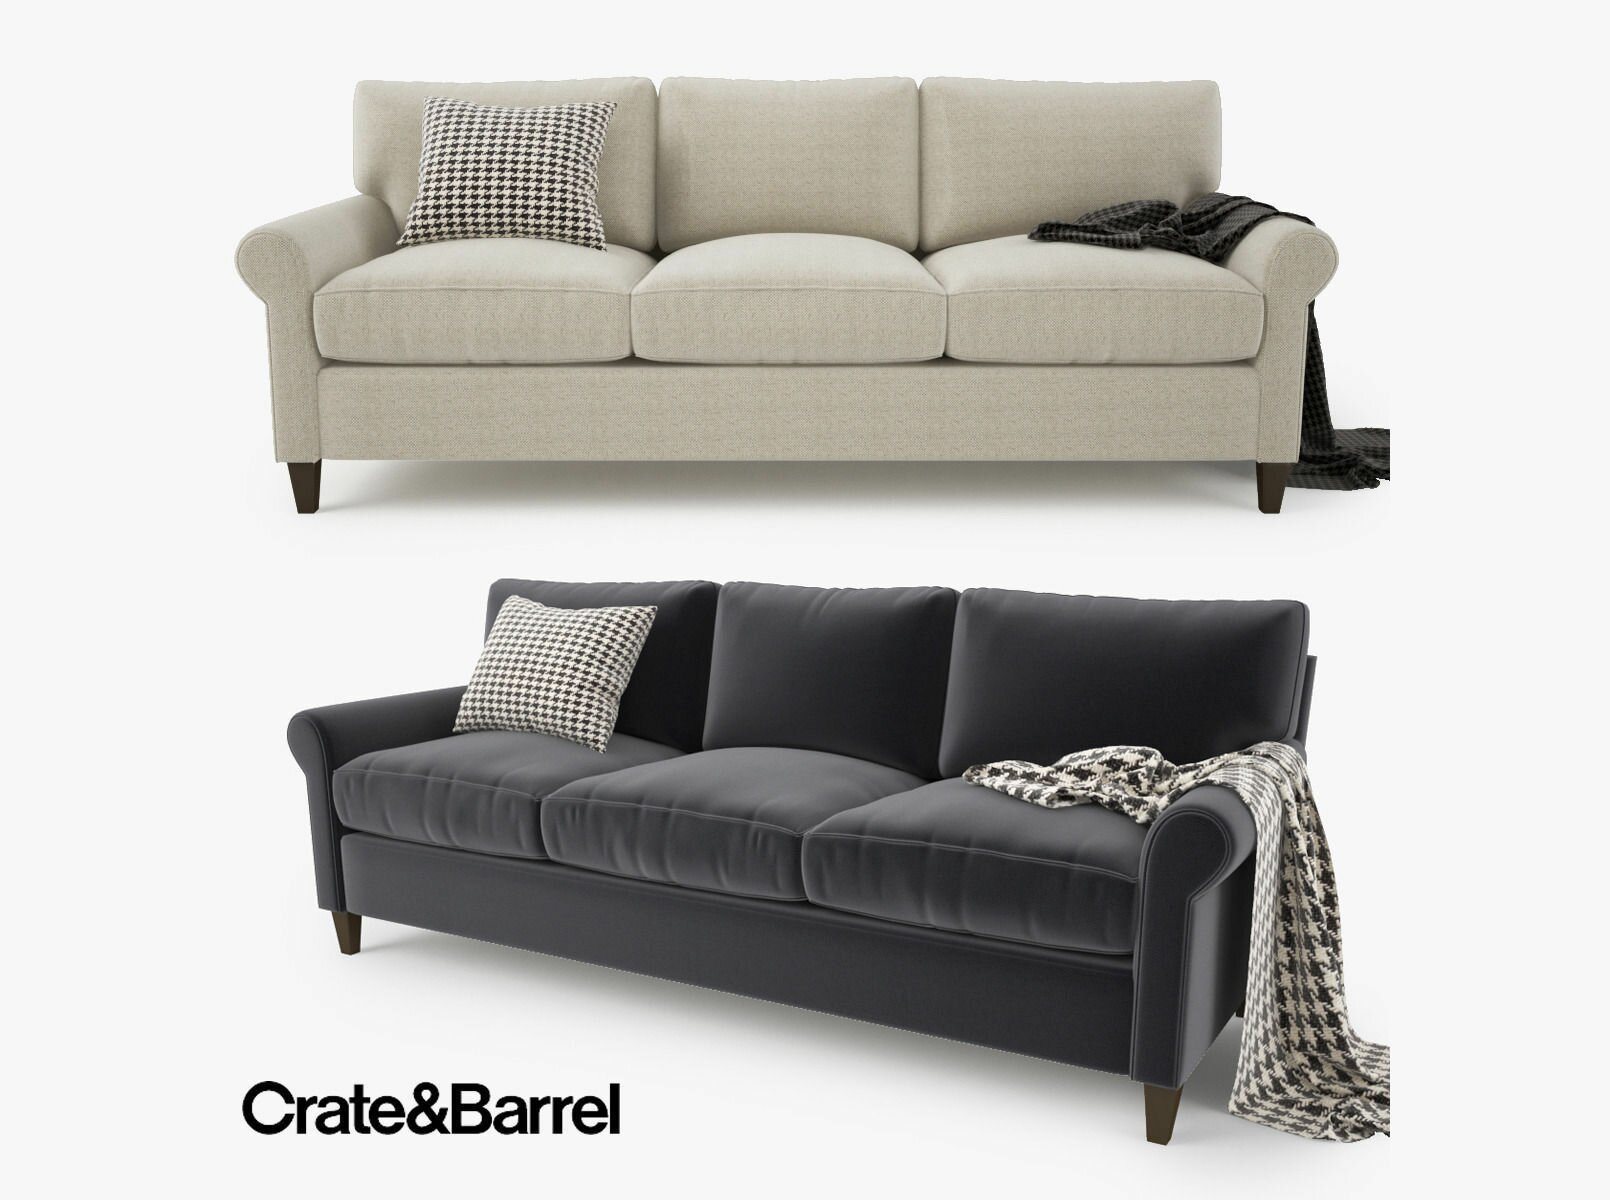 Axis Sectional Sofa | Crate and Barrel Couch Covers | Crate and Barrel Couch